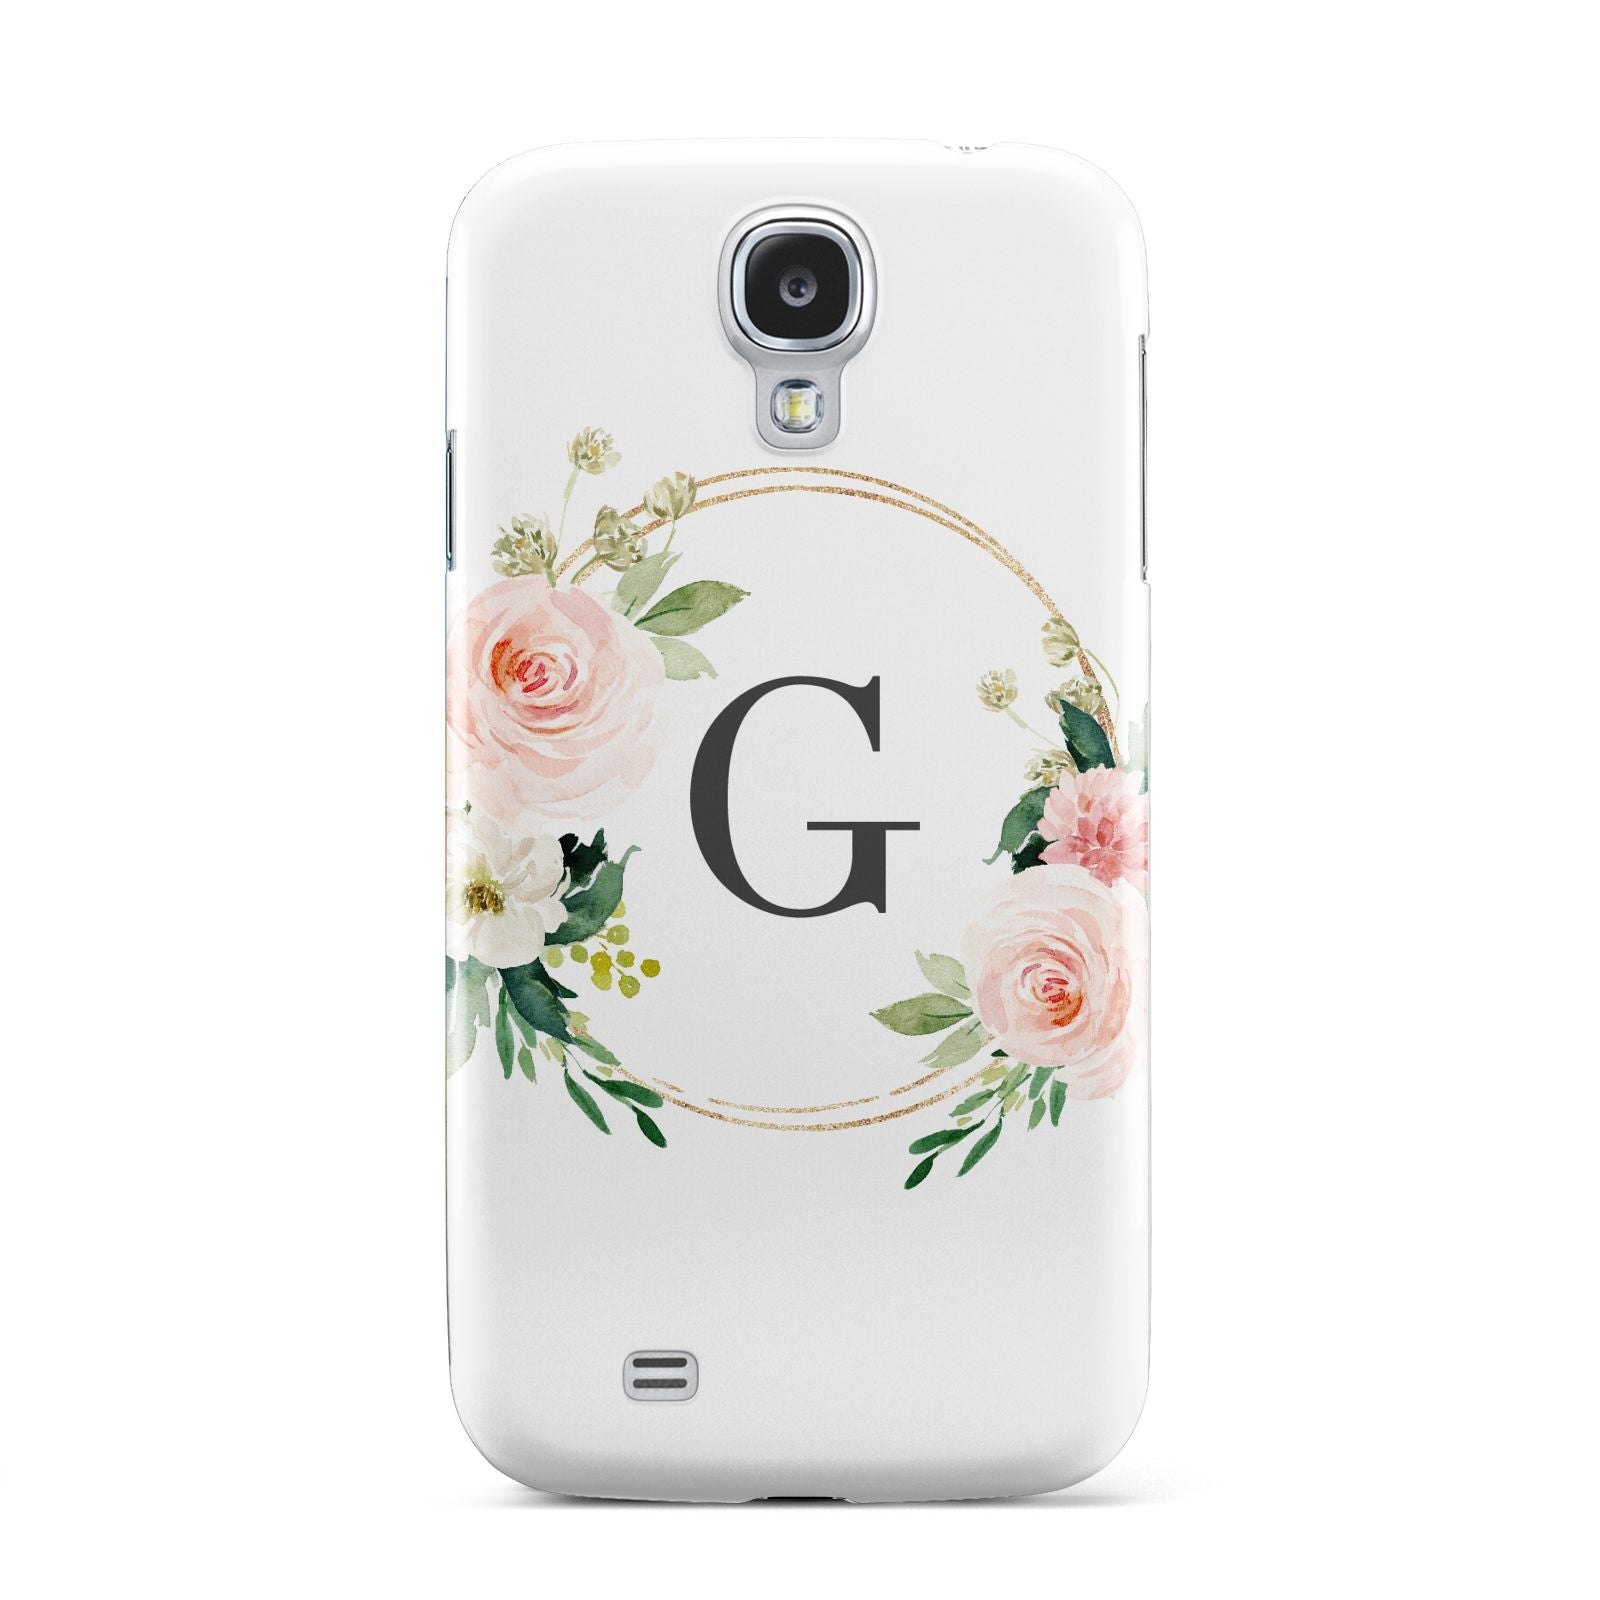 Personalised Blush Floral Wreath Samsung Galaxy S4 Case